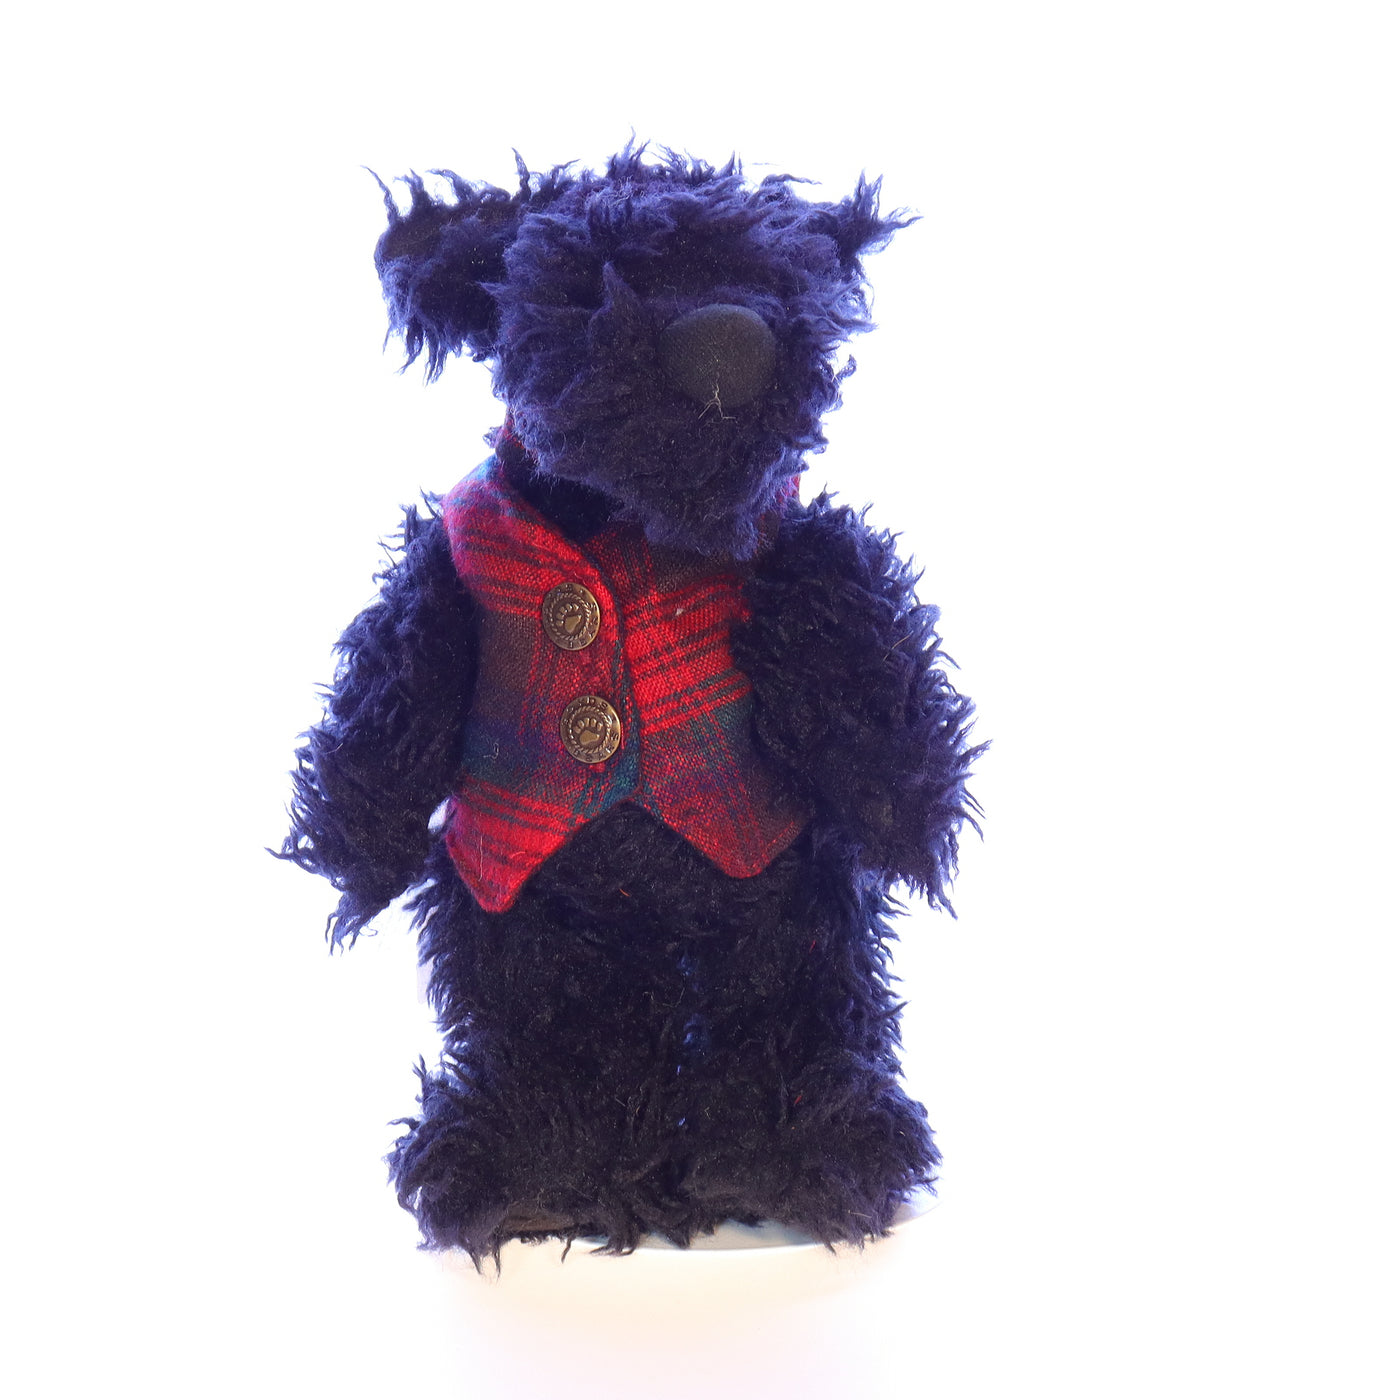 Boyds_Bears_and_Friends_91400_Stewart_MacGregor_JJ_Bean_and_Associates_Stuffed_Animal_1985 Front View